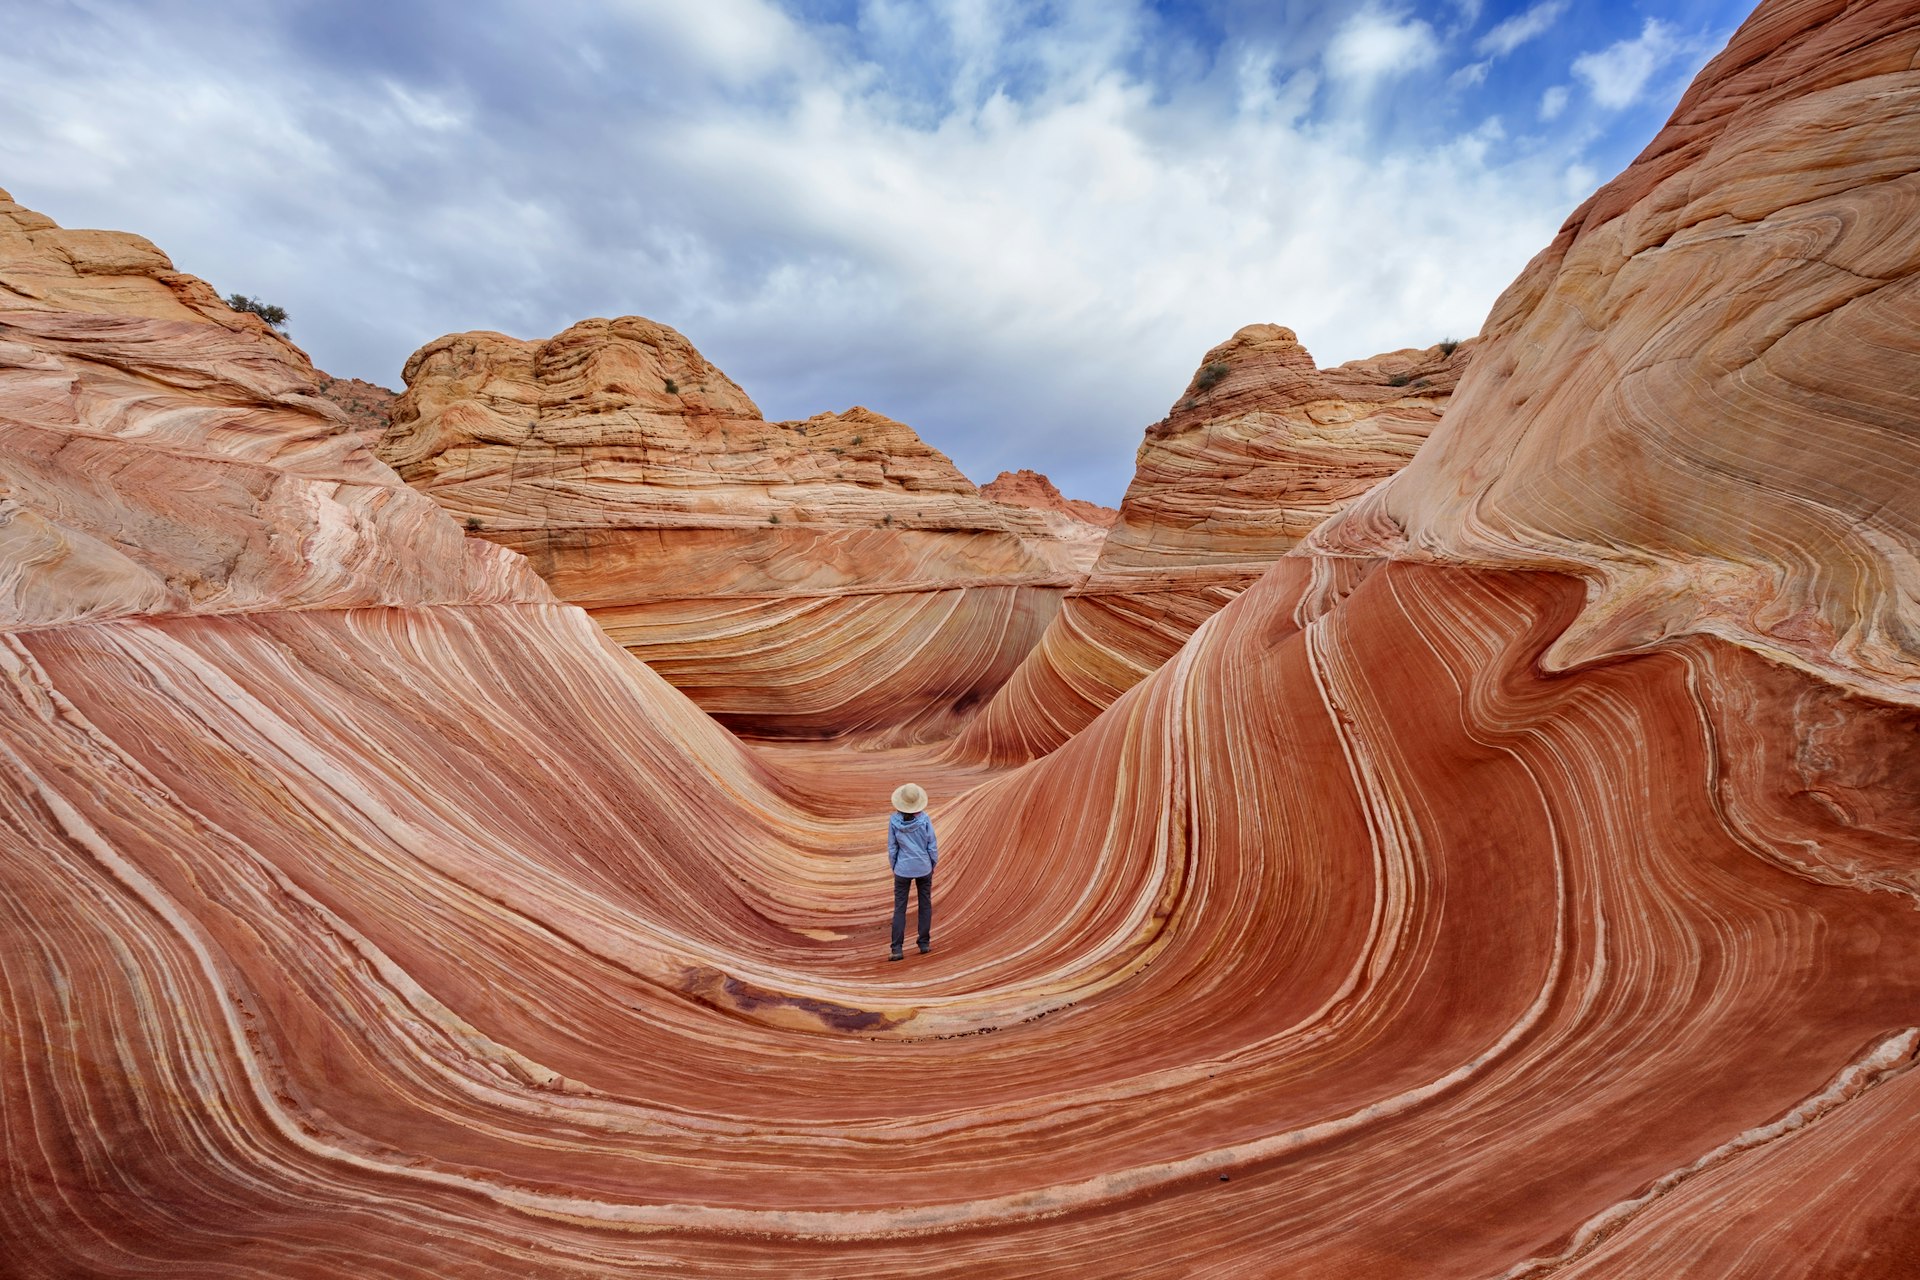 A woman stands among rock formations that appear to curve around her